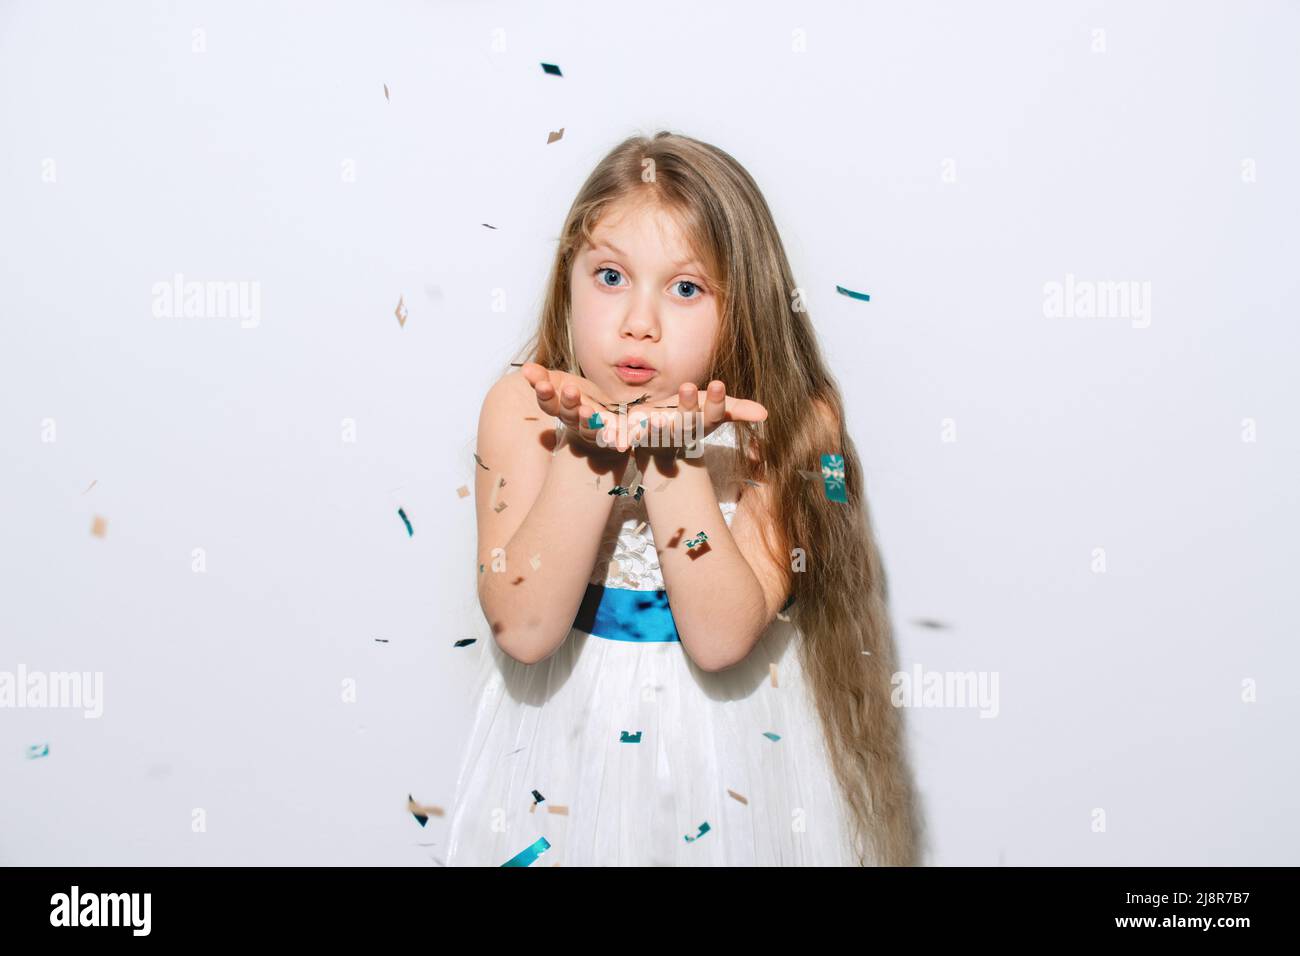 Happy Birthday. Beautiful little girl inflates confetti on a white background. The child is wearing a white dress and a blue ribbon. Big blue eyes and long blond hair. Happy New Year. Copy Space Stock Photo